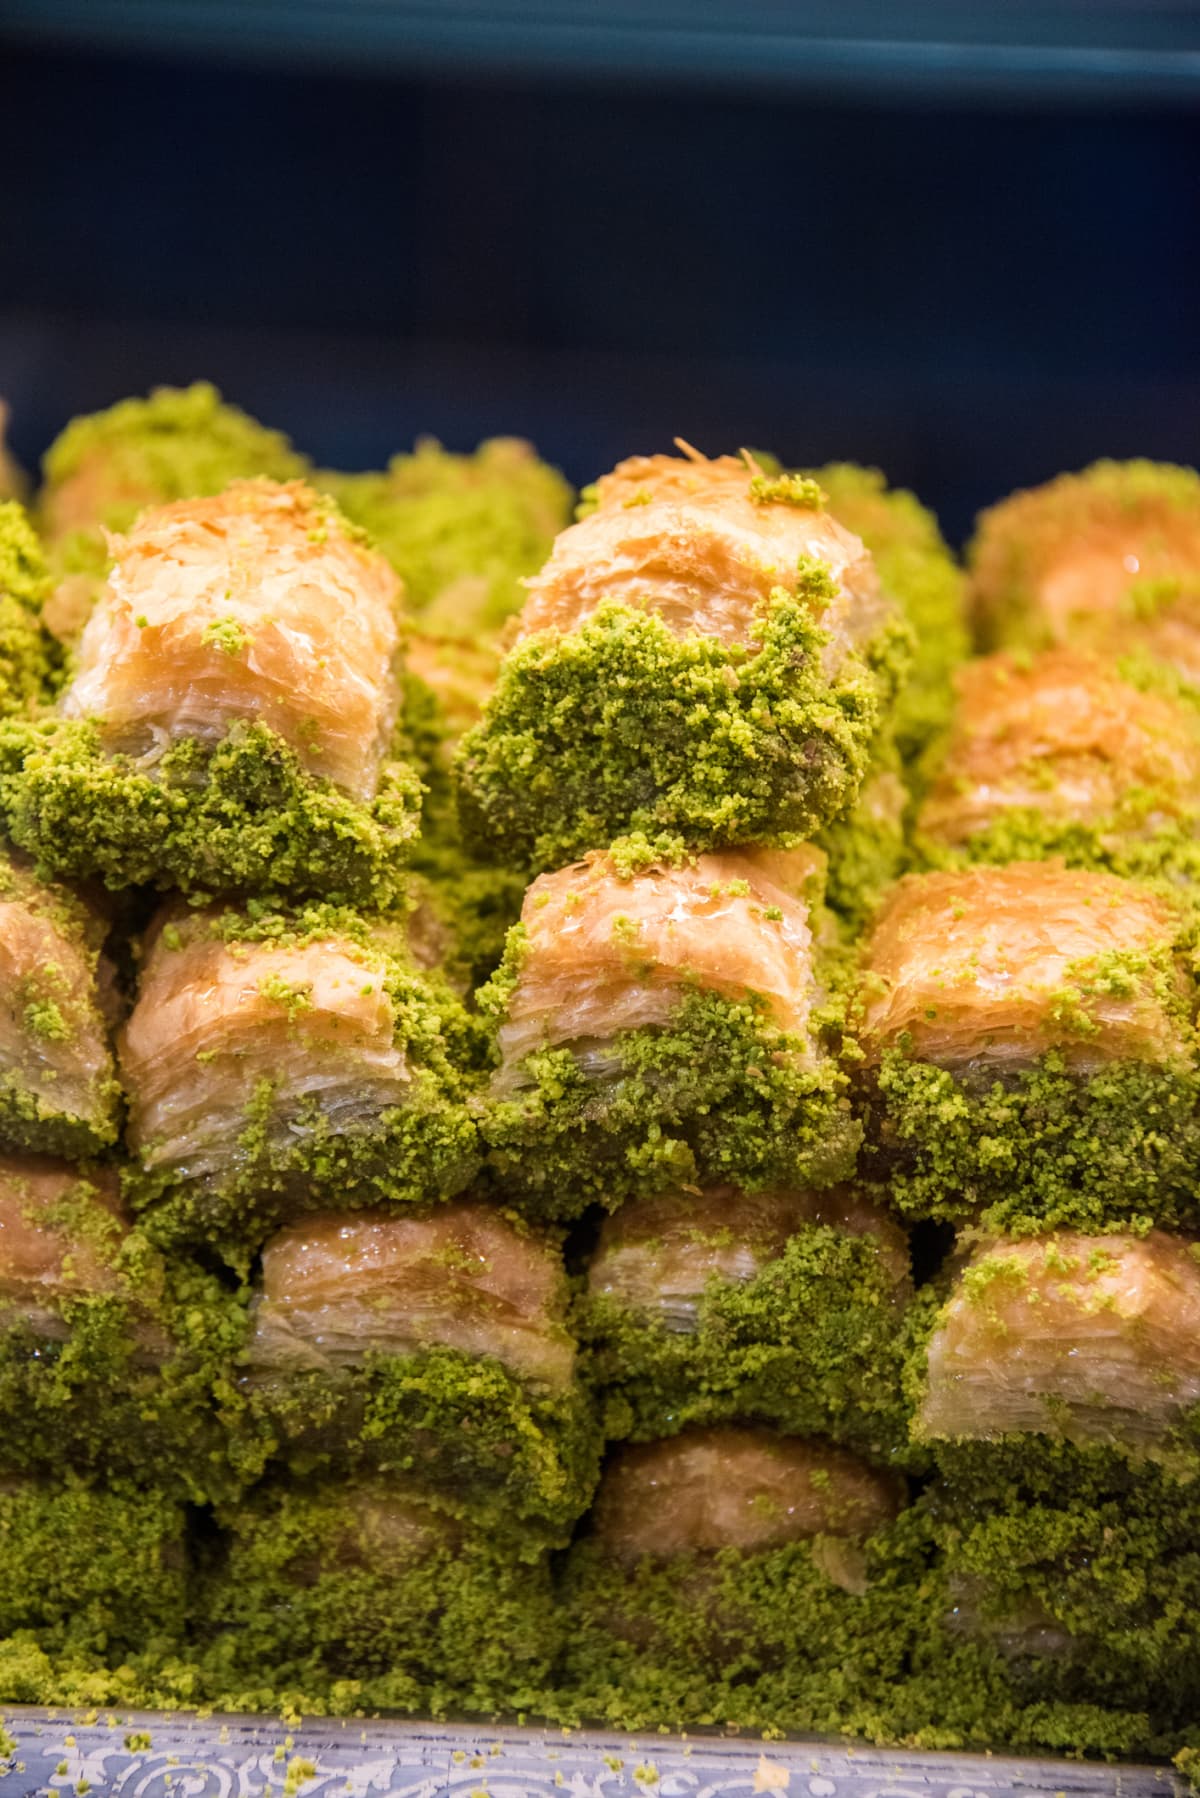 Turkish Pistachio Baklava, layered pastry dessert made of filo pastry, filled with chopped pistachio nuts, and sweetened with honey, on sale in a bakery in Haringey, North London, UK